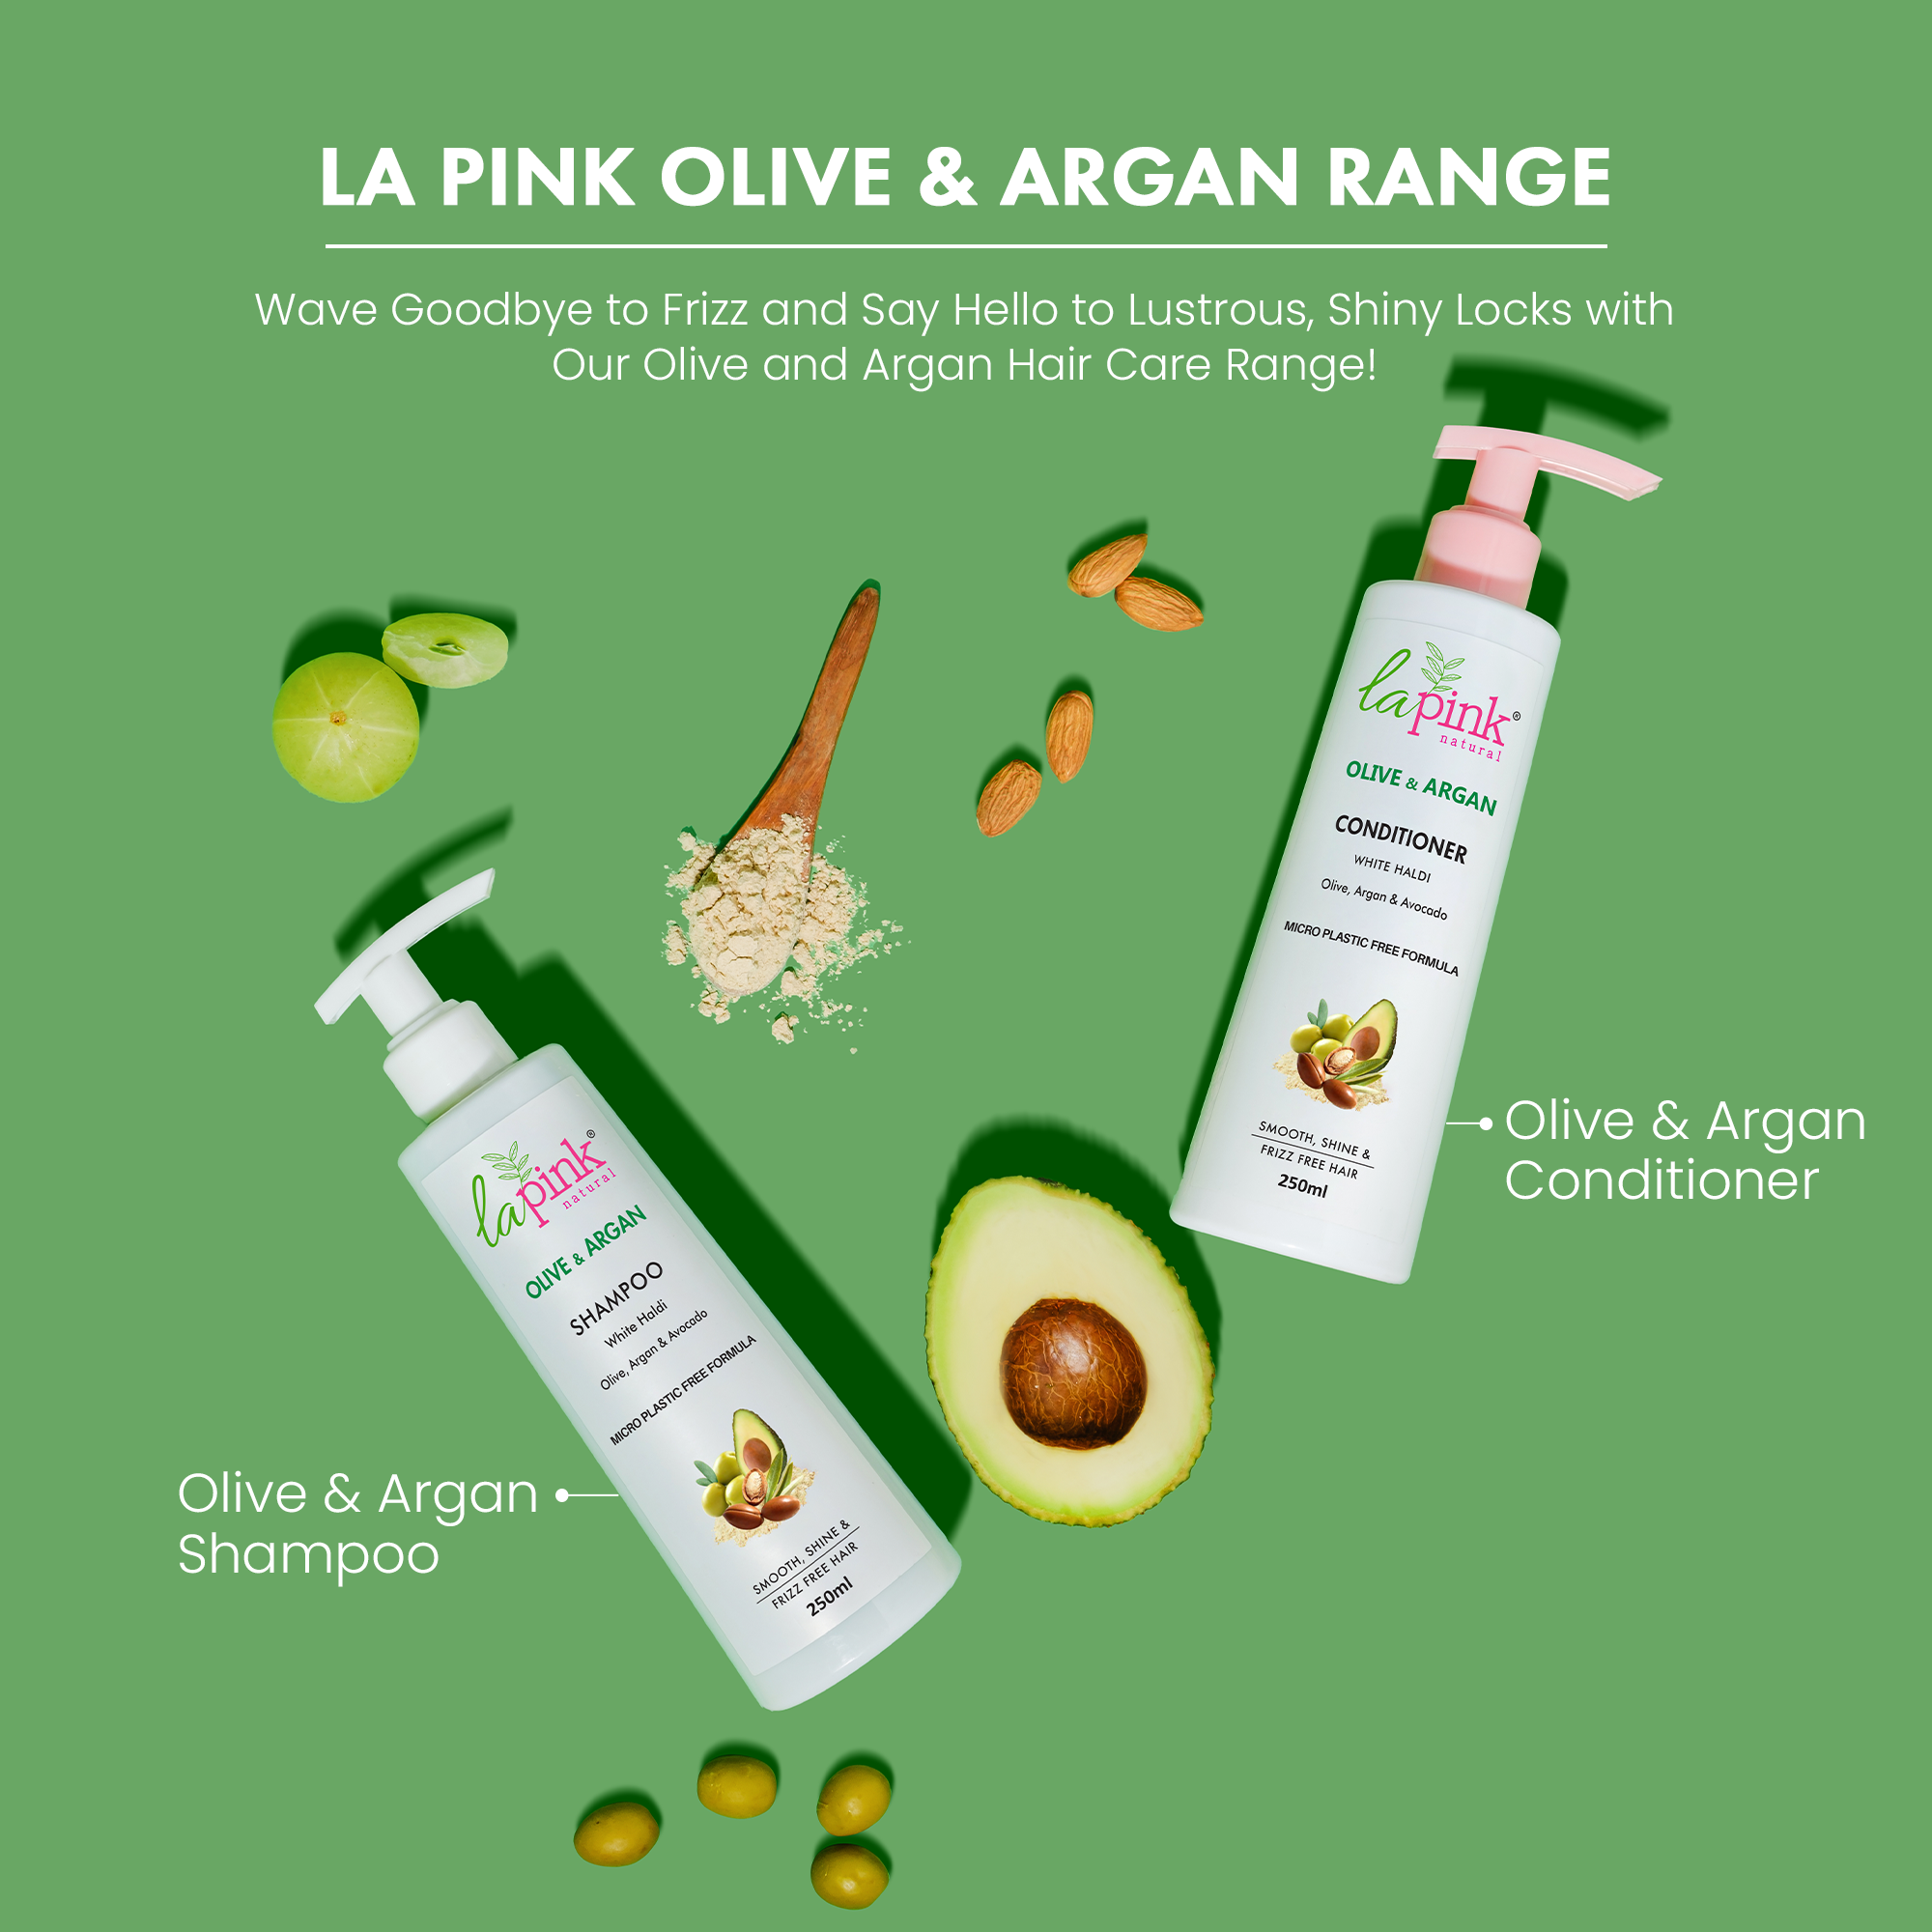 Olive &amp; Argan Conditioner for smooth and frizz-free hair